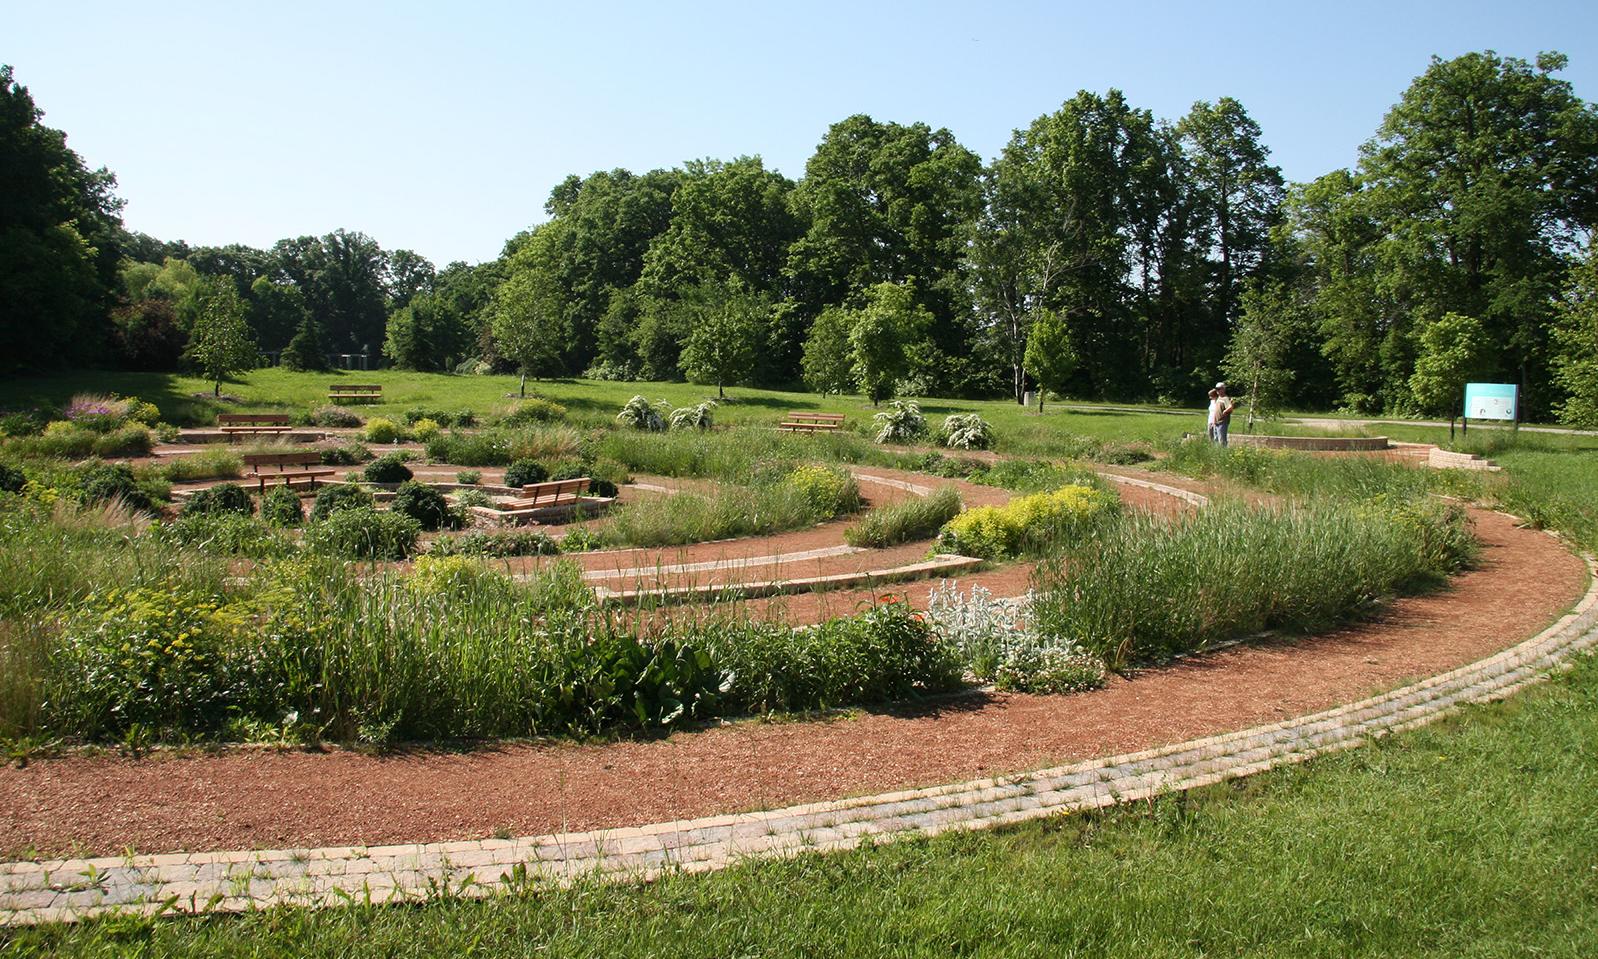 Carol Shields Memorial Labyrinth. A long view of the labyrinth showing the alternating circular bands of greenery and pathway. 